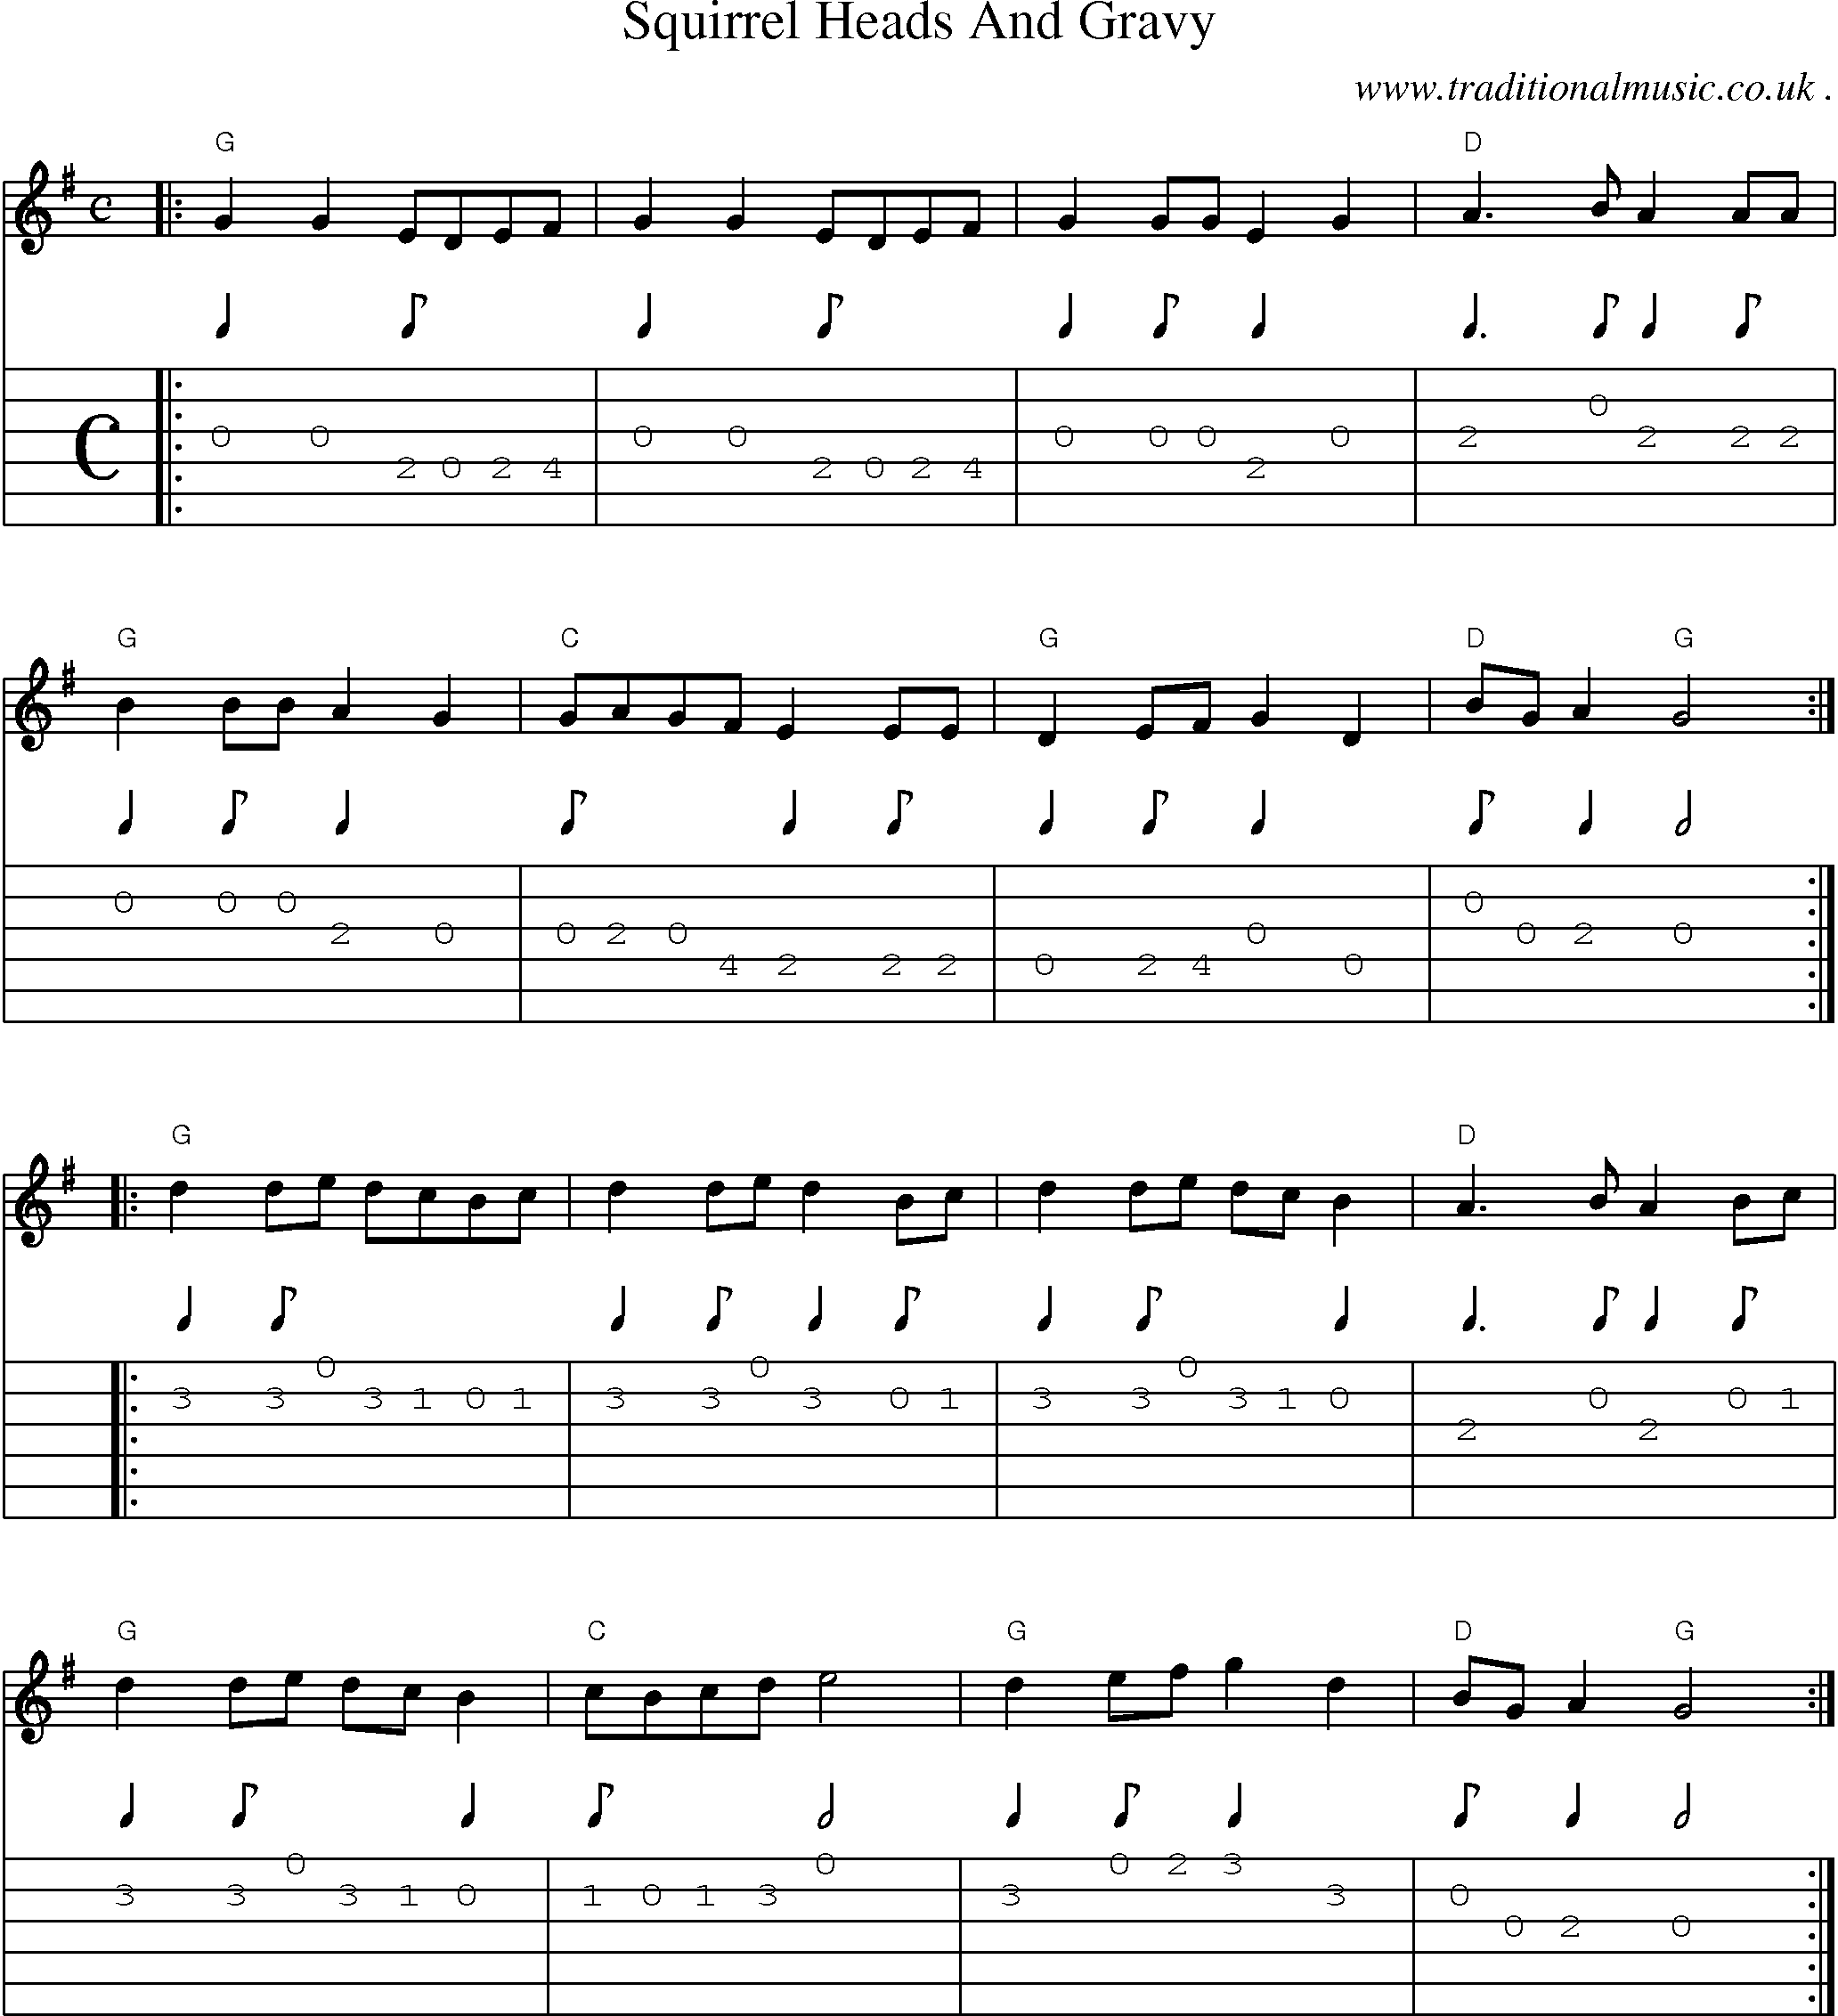 Music Score and Guitar Tabs for Squirrel Heads And Gravy